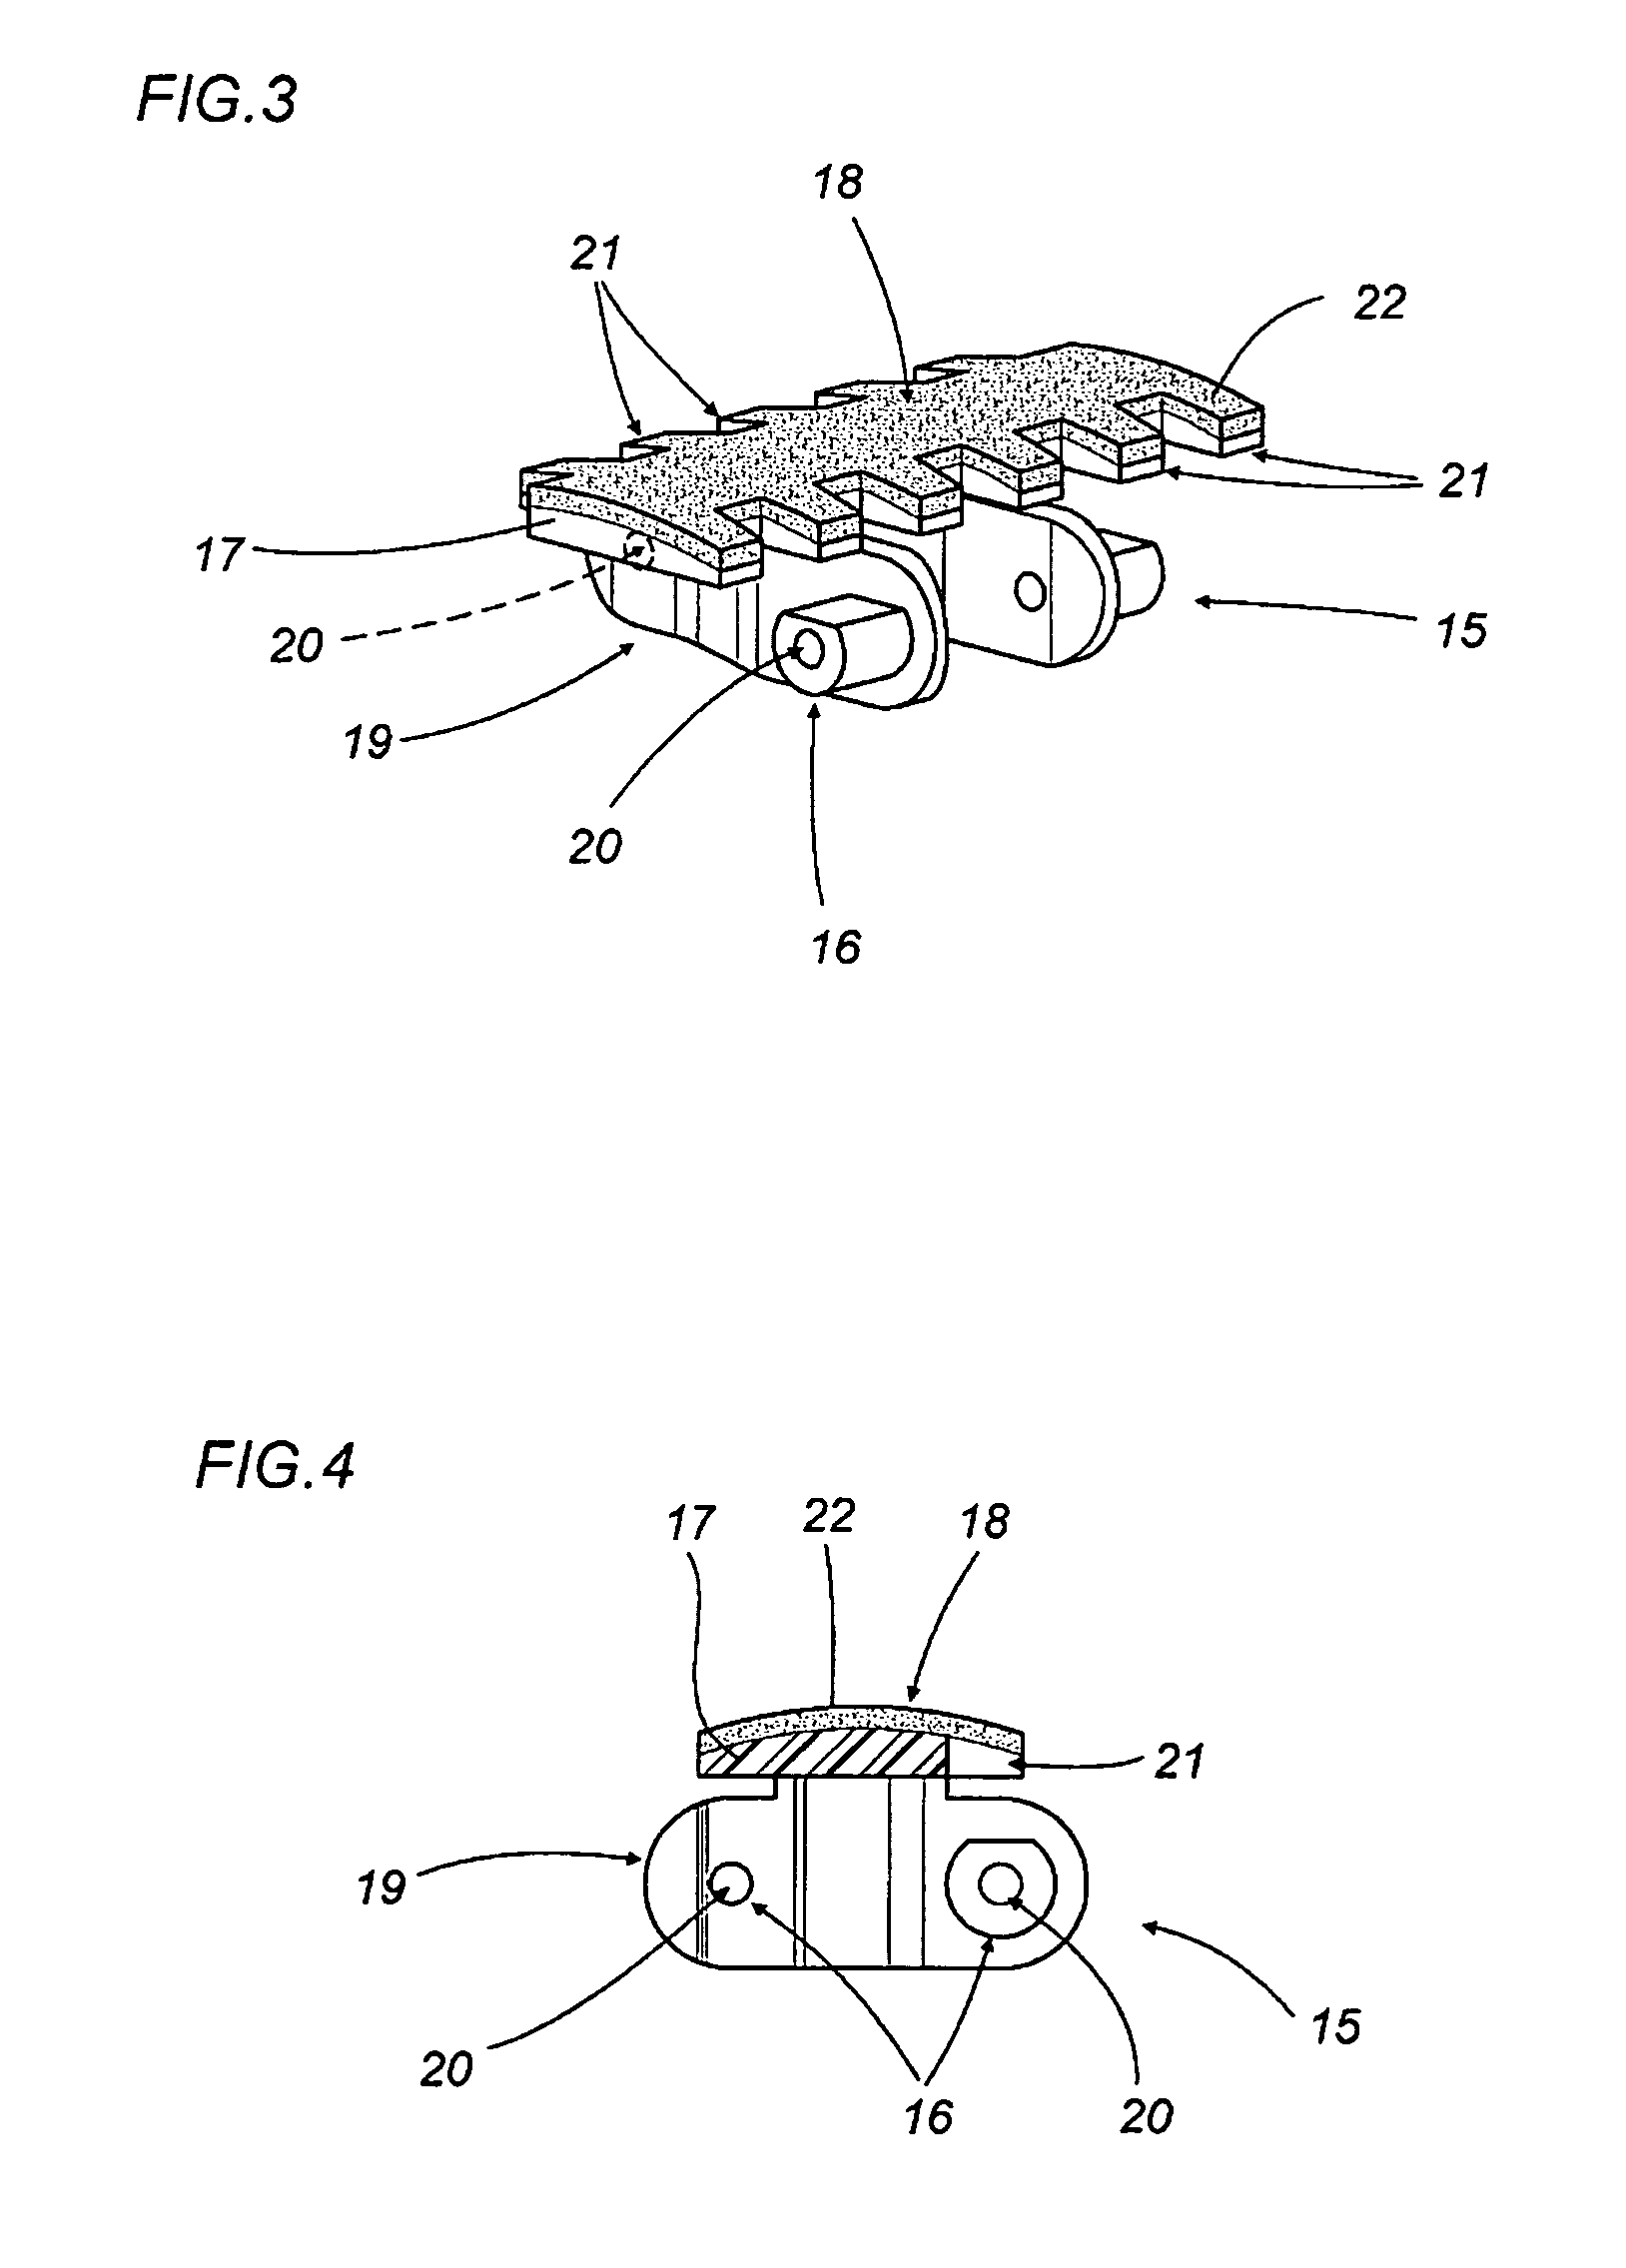 Transfer device in manufacturing systems for tobacco products